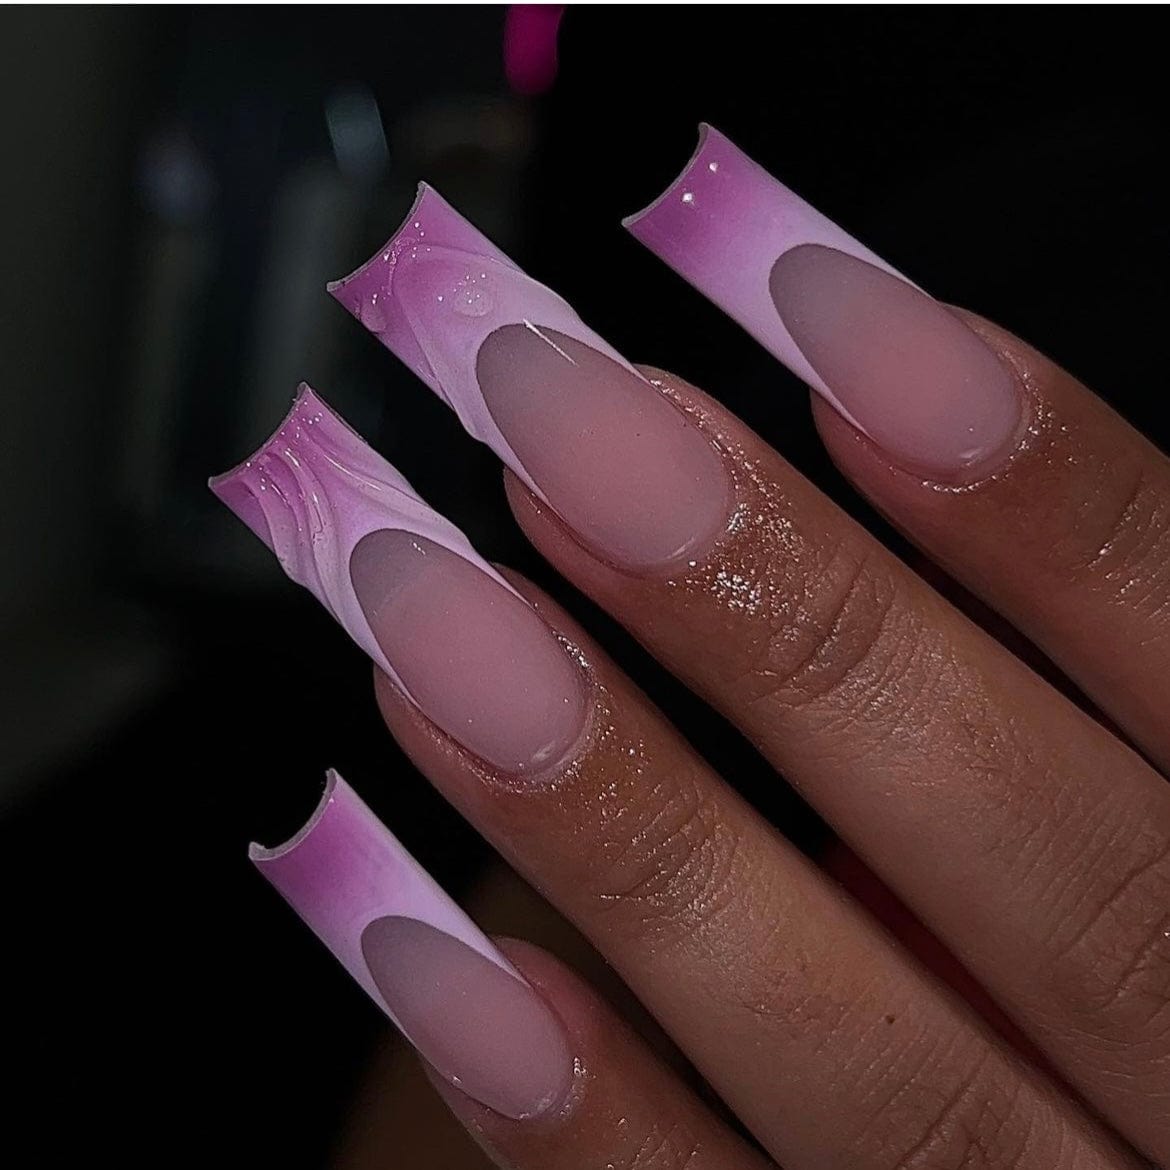 pink french manicure